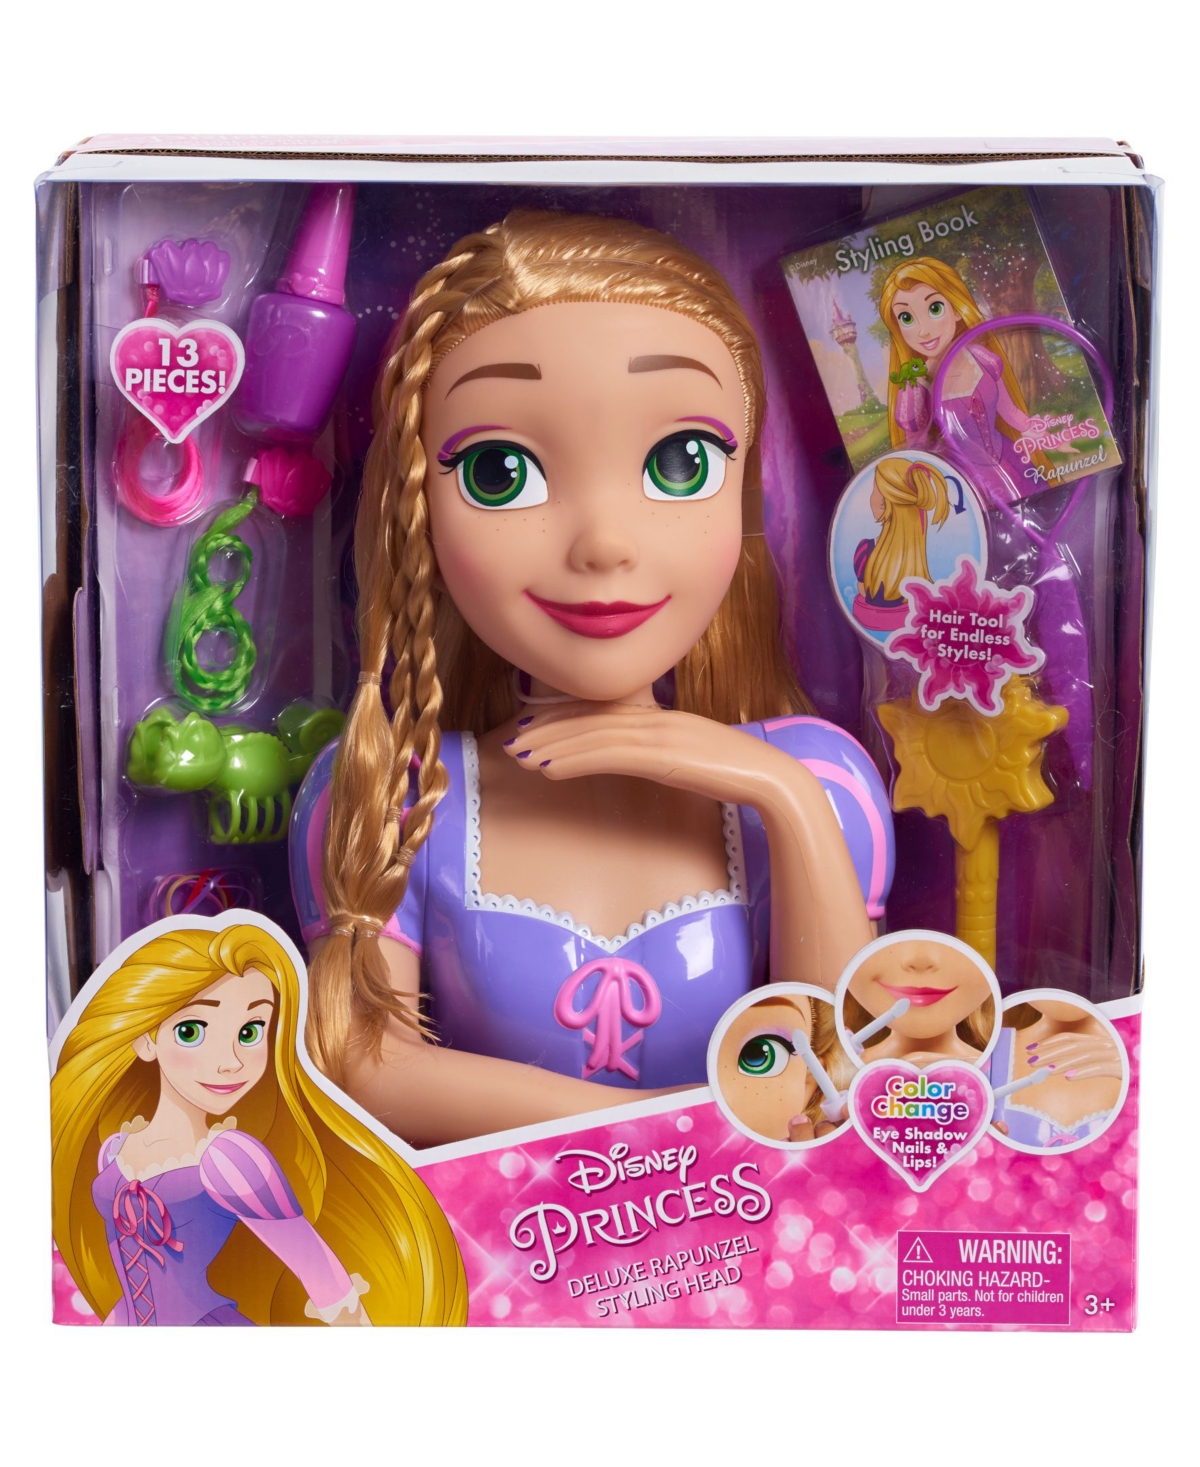 Disney Princess Deluxe Rapunzel Pretend Play Toy Doll Styling Head